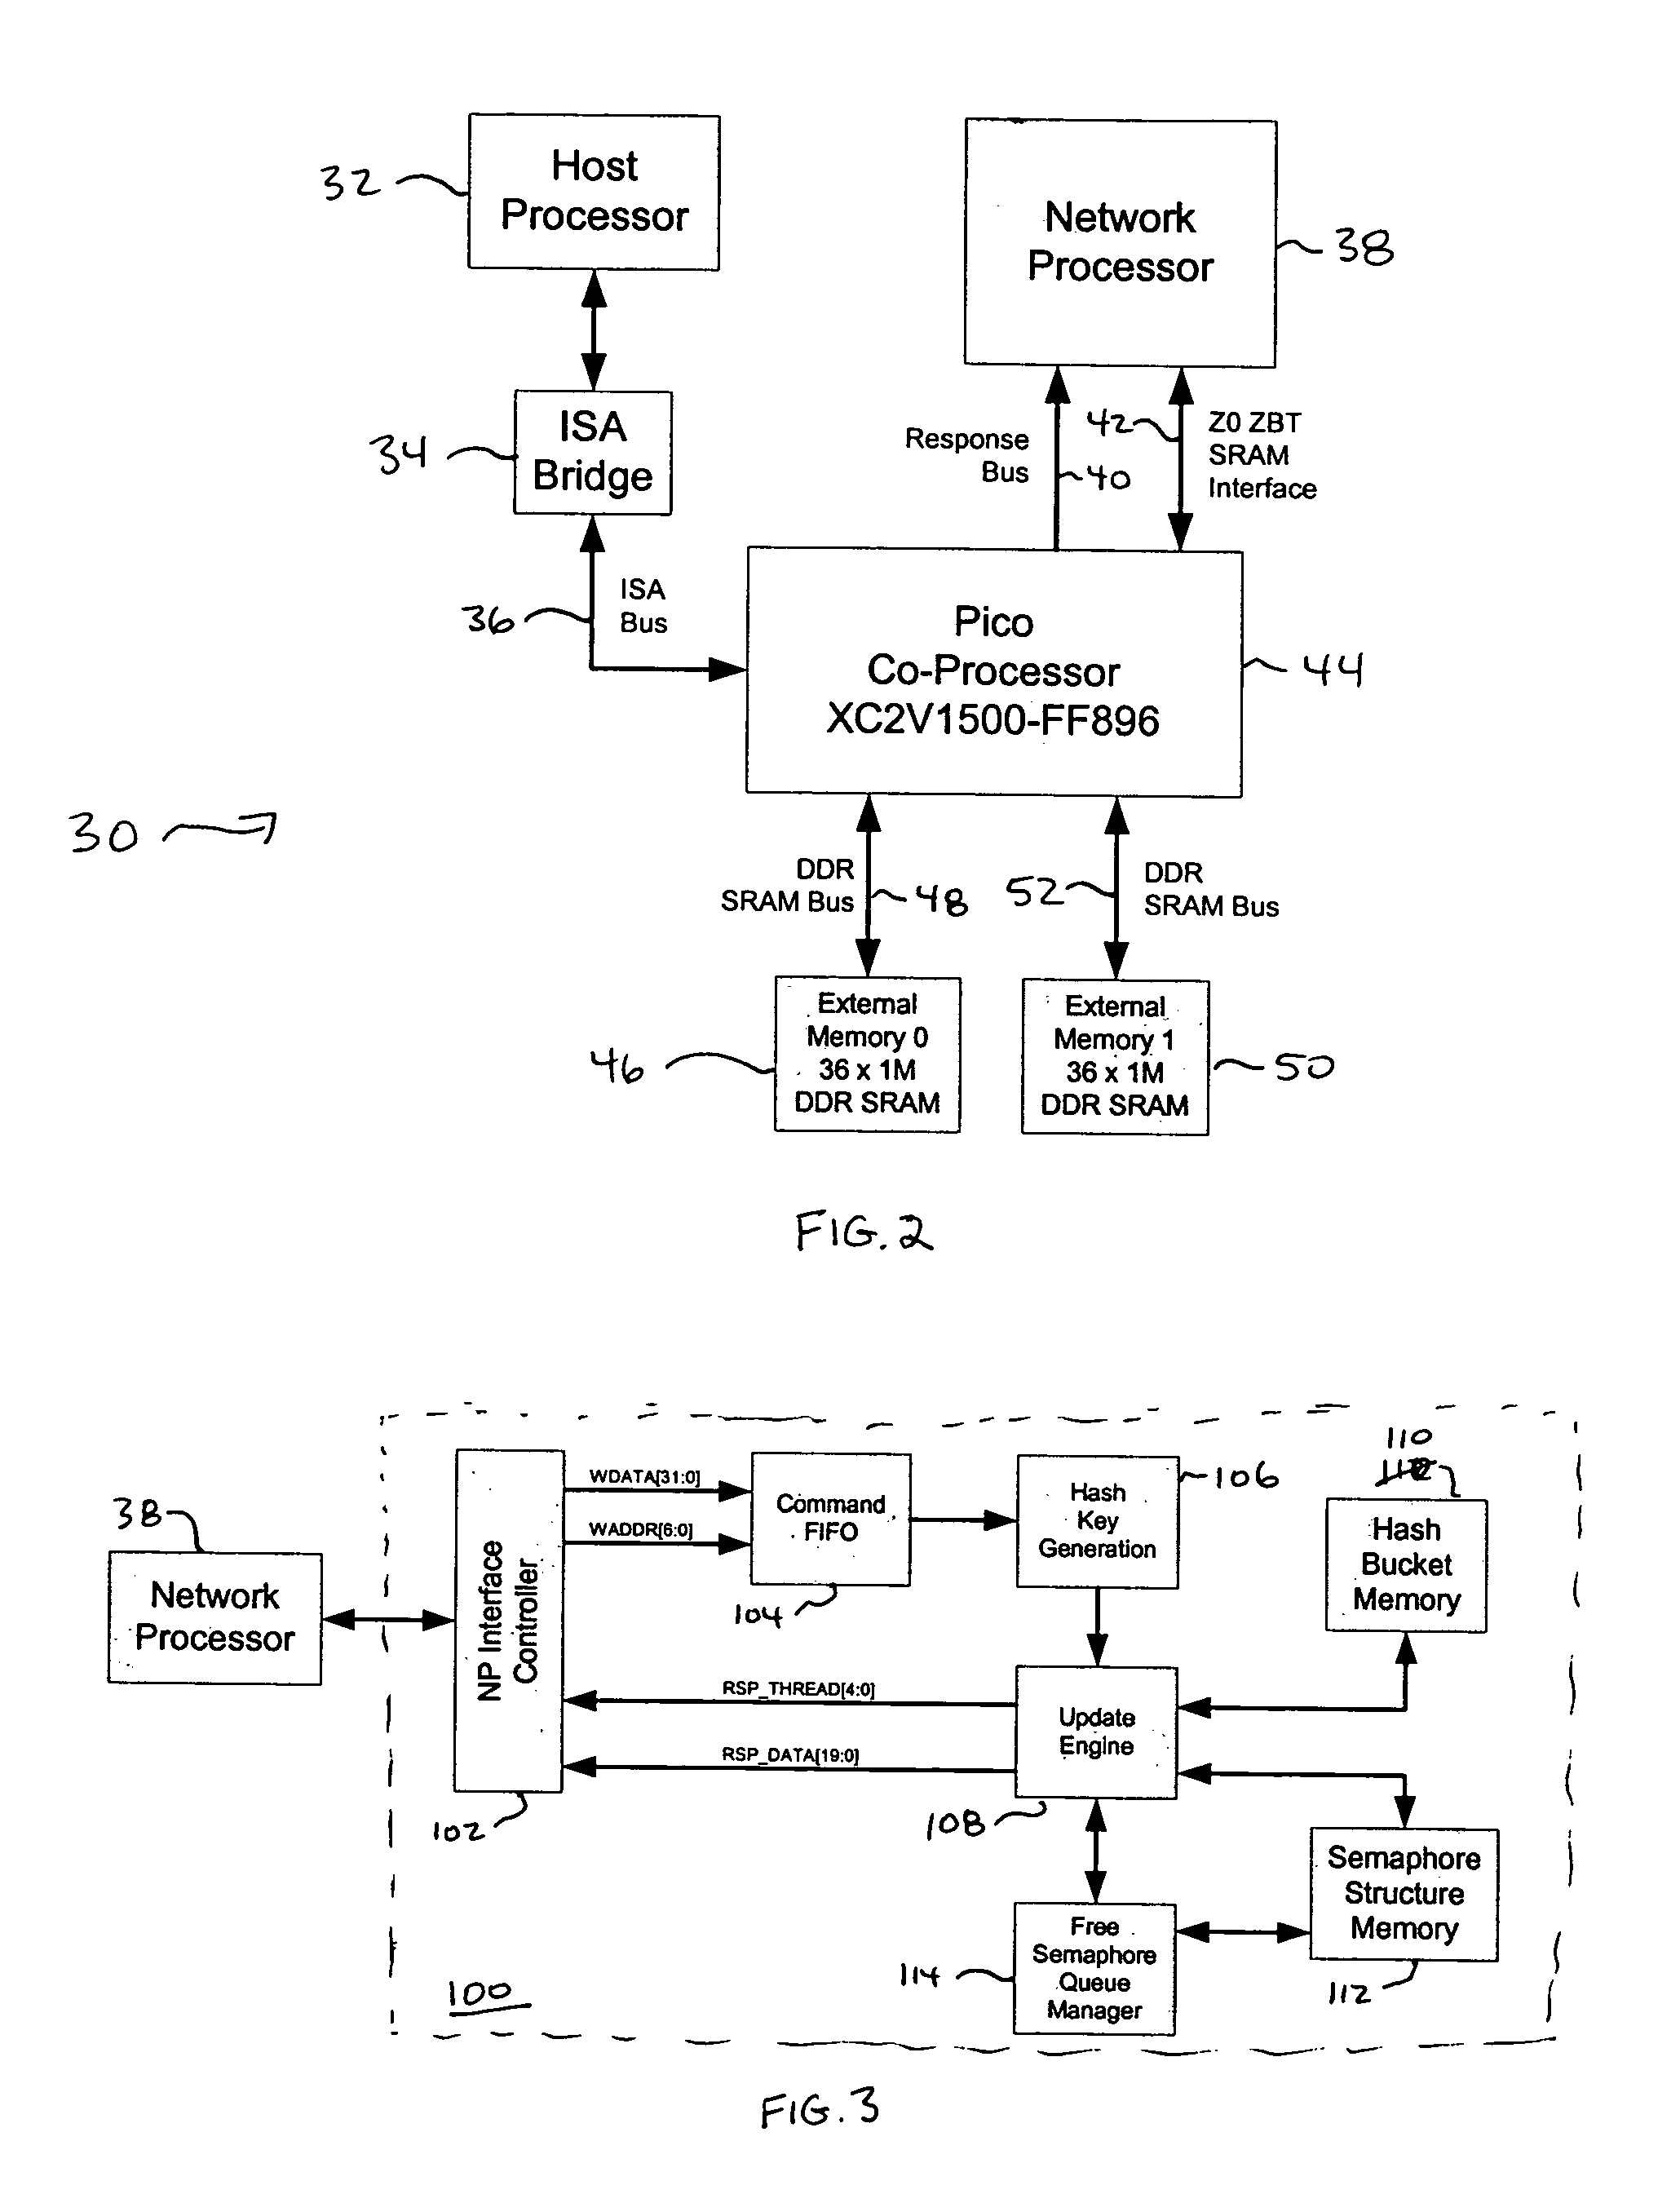 Apparatus to offload and accelerate pico code processing running in a storage processor